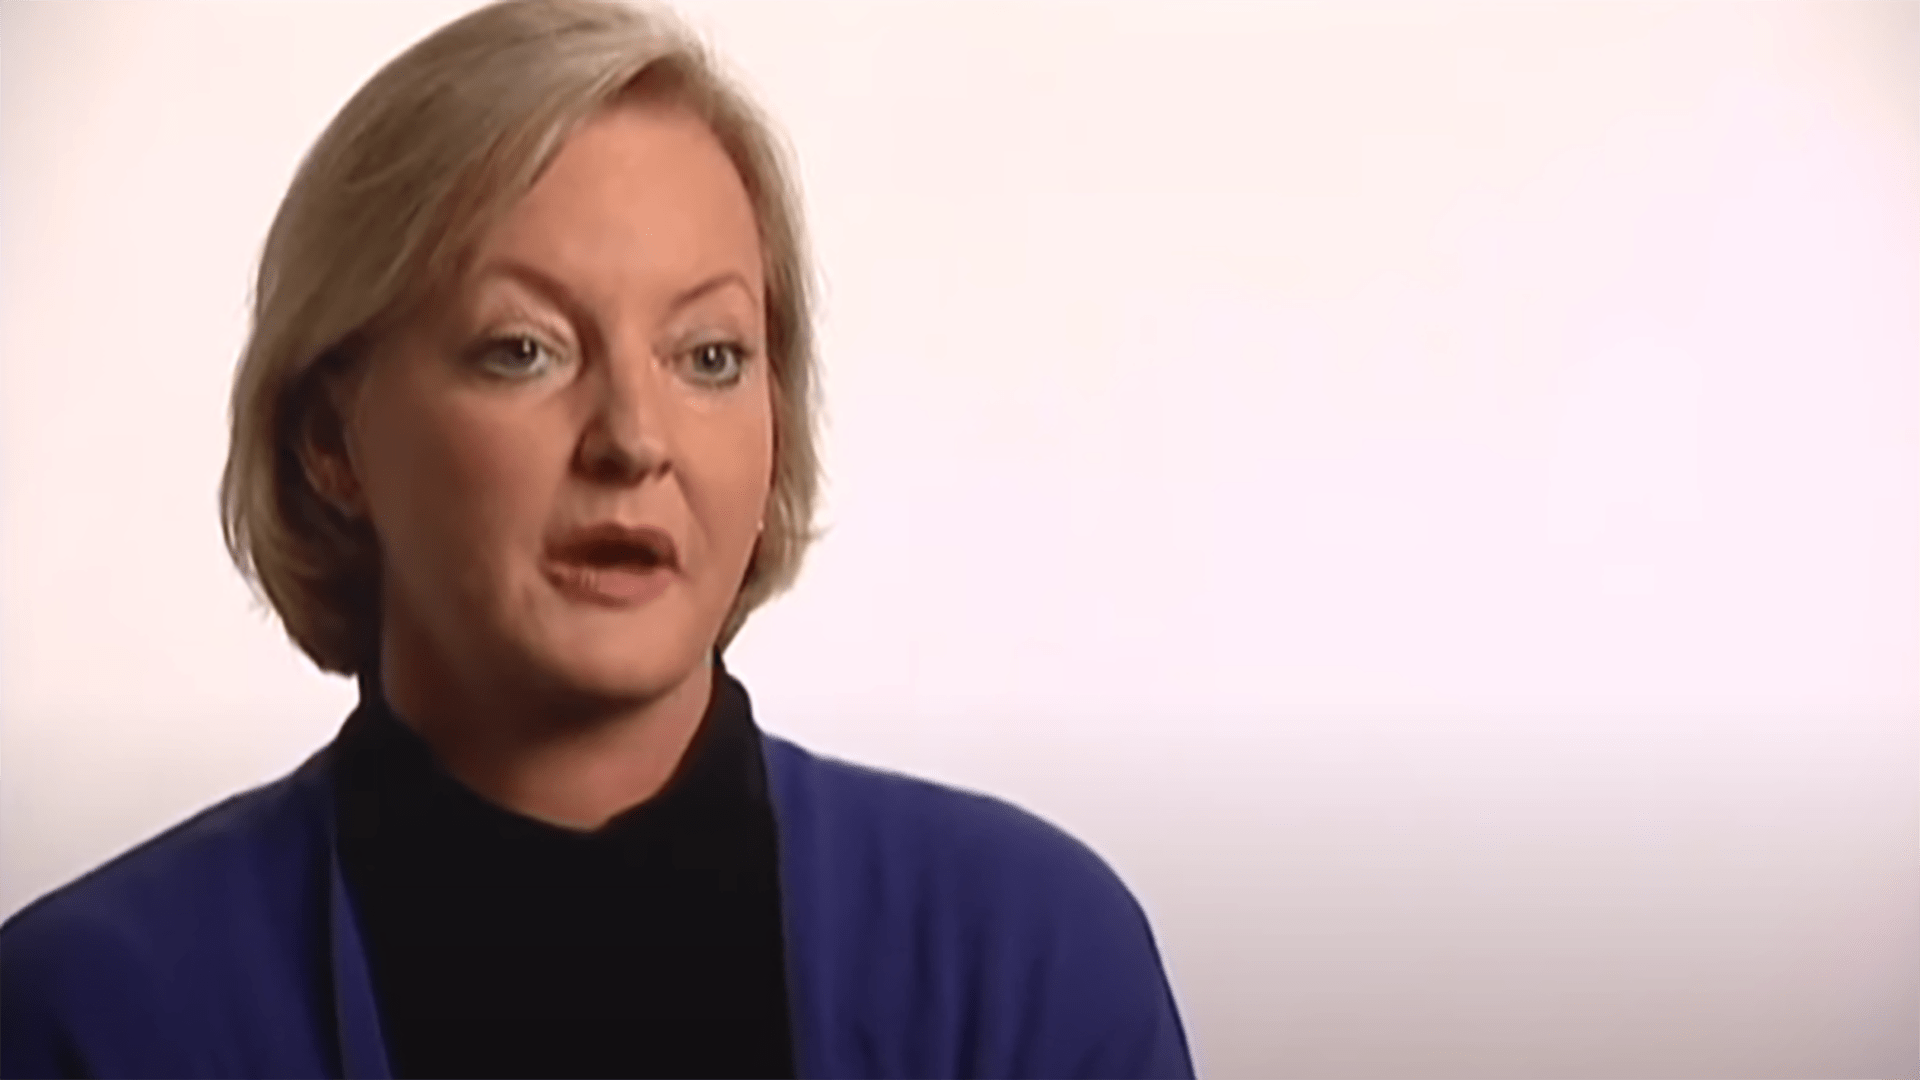 A middle-aged woman with short blonde hair wearing a black turtleneck and blue cardigan is interviewed against a white background.